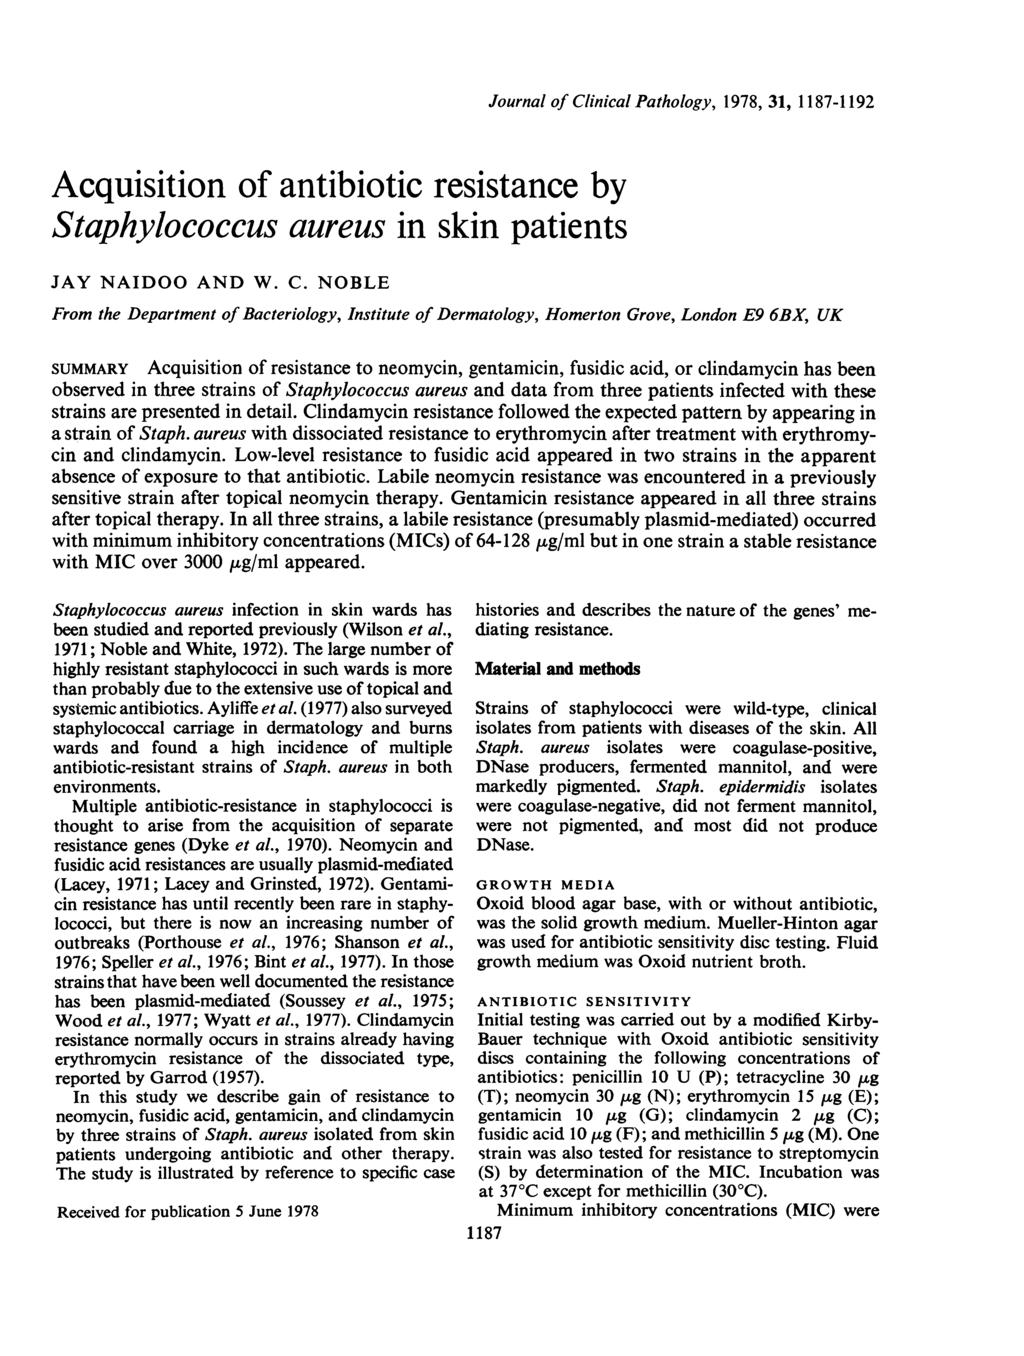 Acquisition of antibiotic resistance by Staphylococcus aureus in skin patients JAY NAIDOO AND W. C.